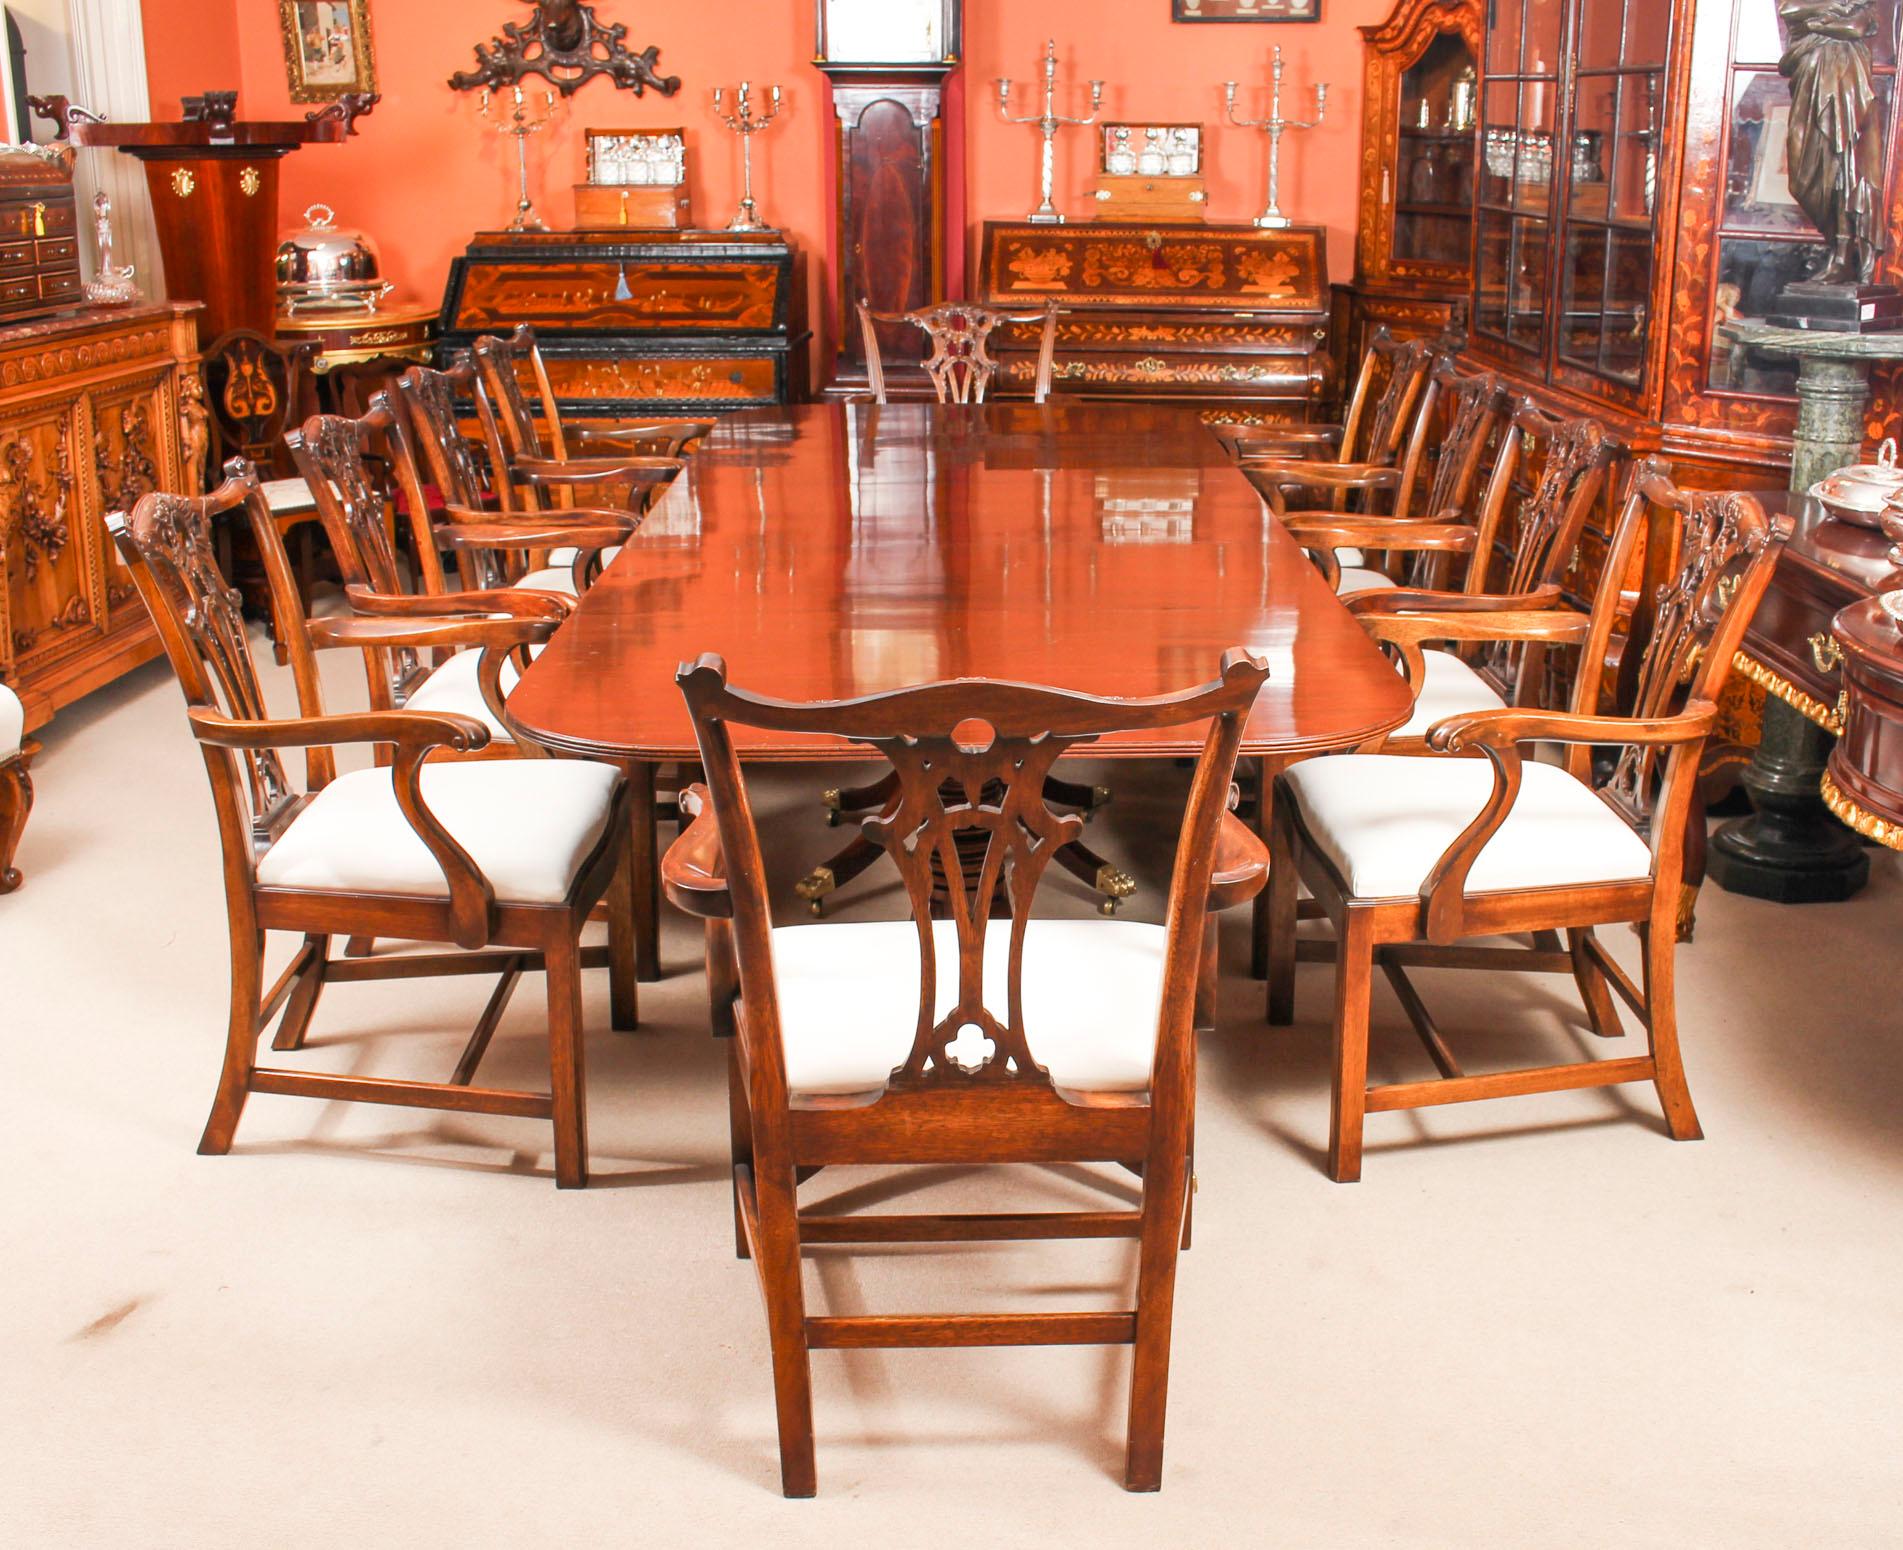 This is an elegant dining set comprising an antique George III Regency Period dining table, Circa 1820 in date, with a fabulous set of ten Chippendale Revival armchairs.

The table is raised on three bases each with turned pillars on sabre legs,